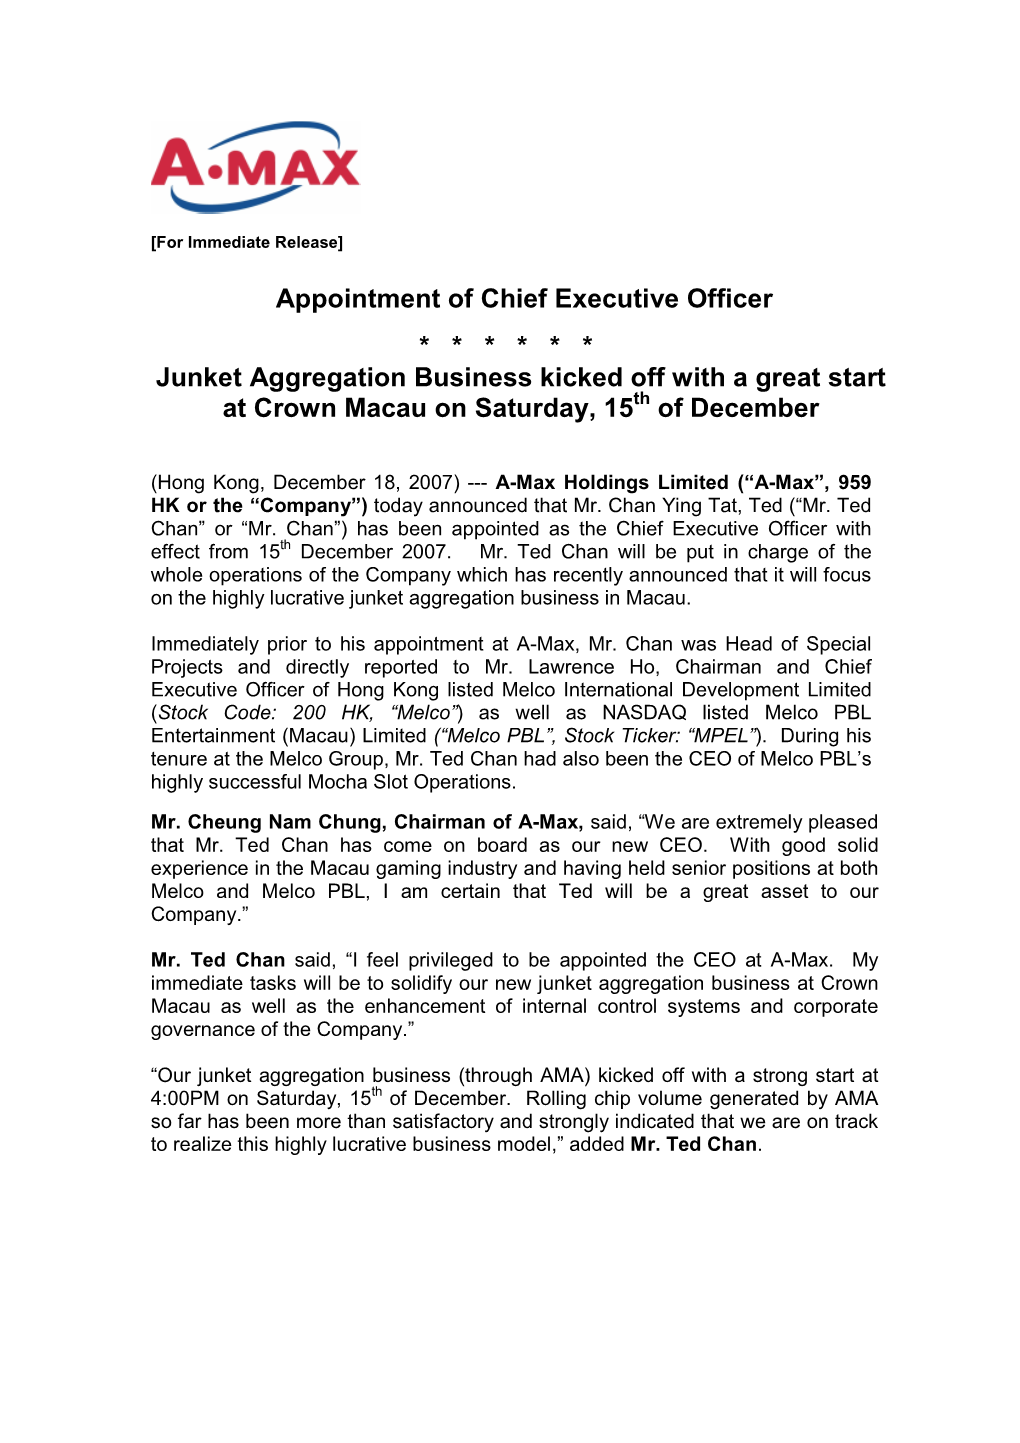 Appointment of Chief Executive Officer